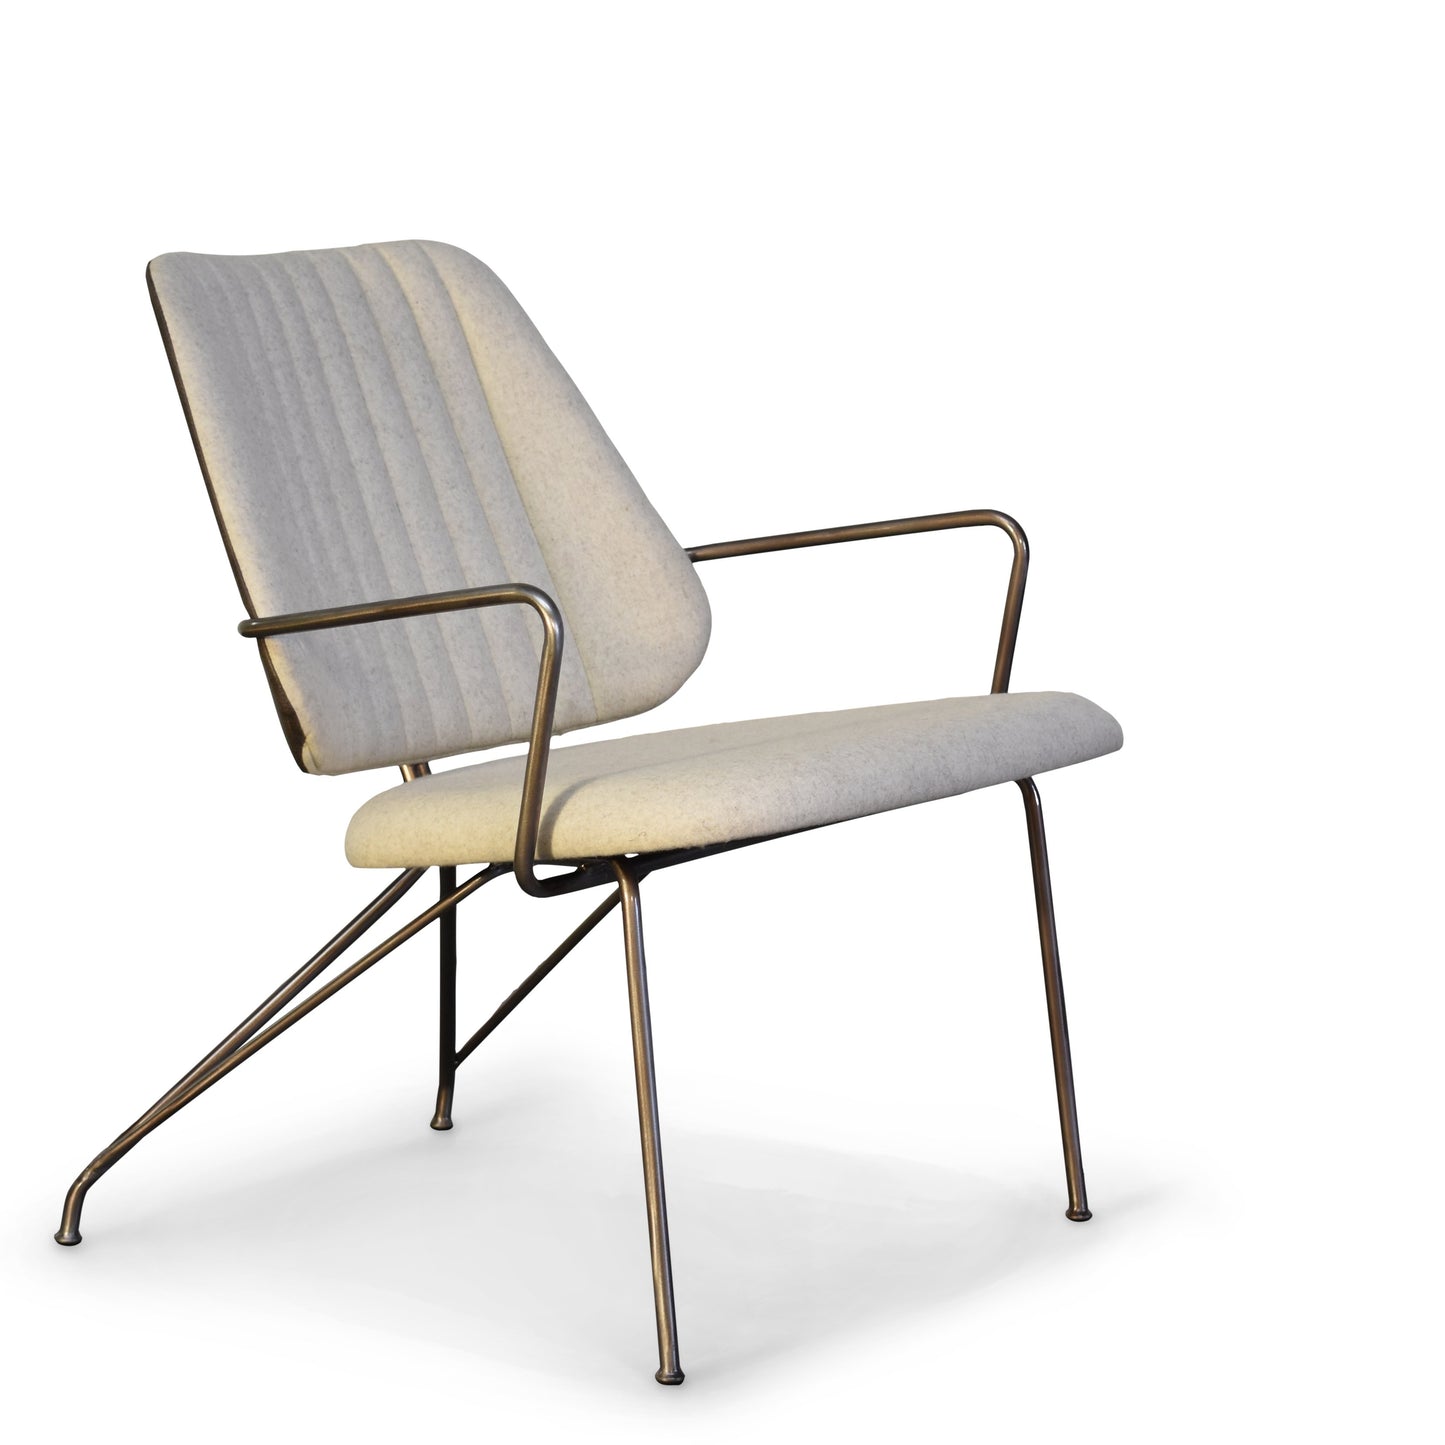 Taylor Contemporary Lounge Chair Ivory/Pewter Gingko Furniture  Ivory/Pewter   Four Hands, Burke Decor, Mid Century Modern Furniture, Old Bones Furniture Company, Old Bones Co, Modern Mid Century, Designer Furniture, https://www.oldbonesco.com/